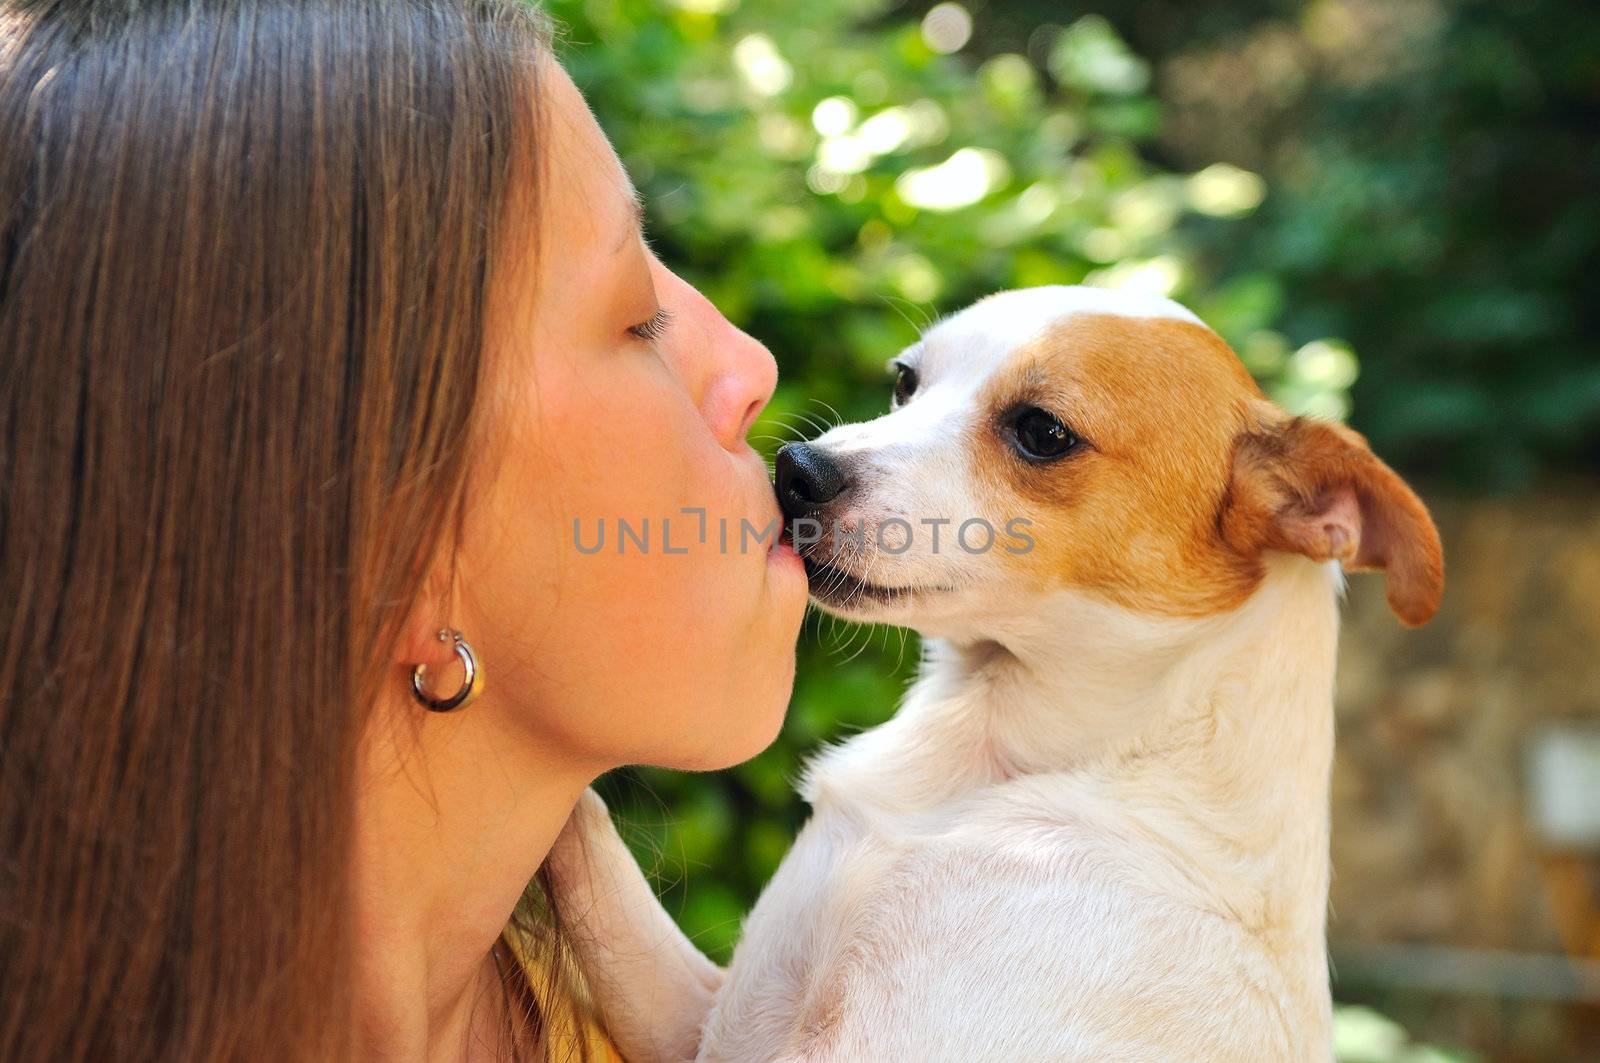 A girl holding a small dog who loved her kisses